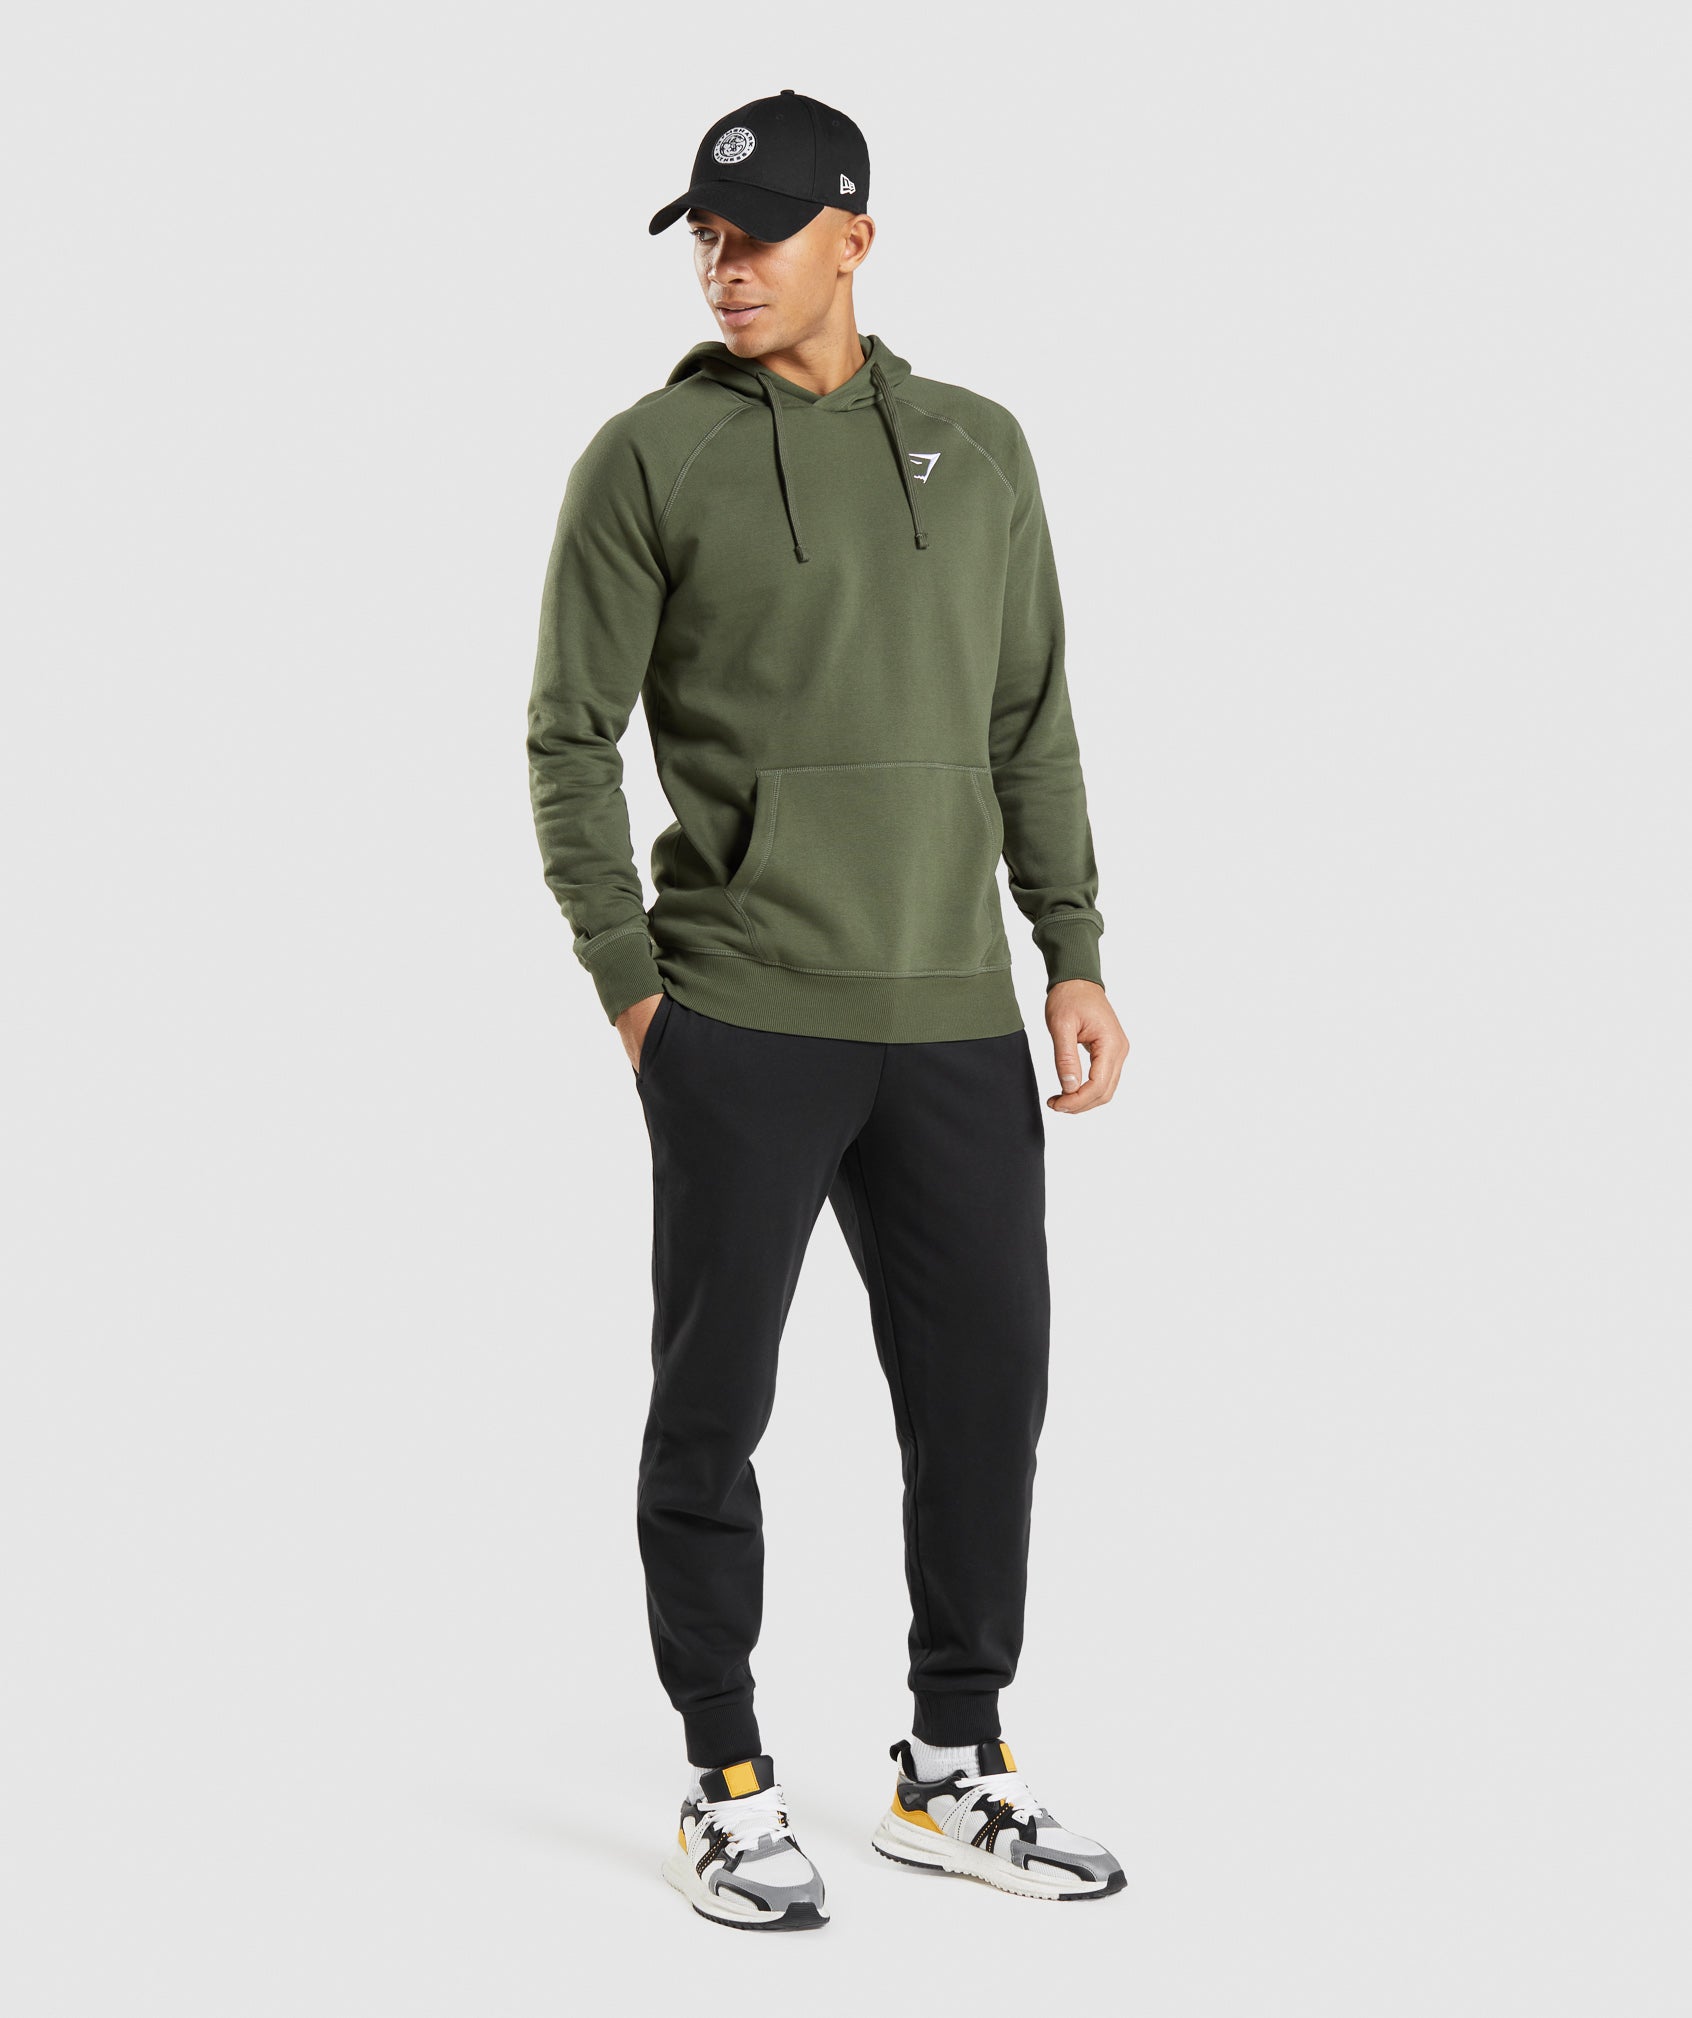 Crest Hoodie in Core Olive - view 4